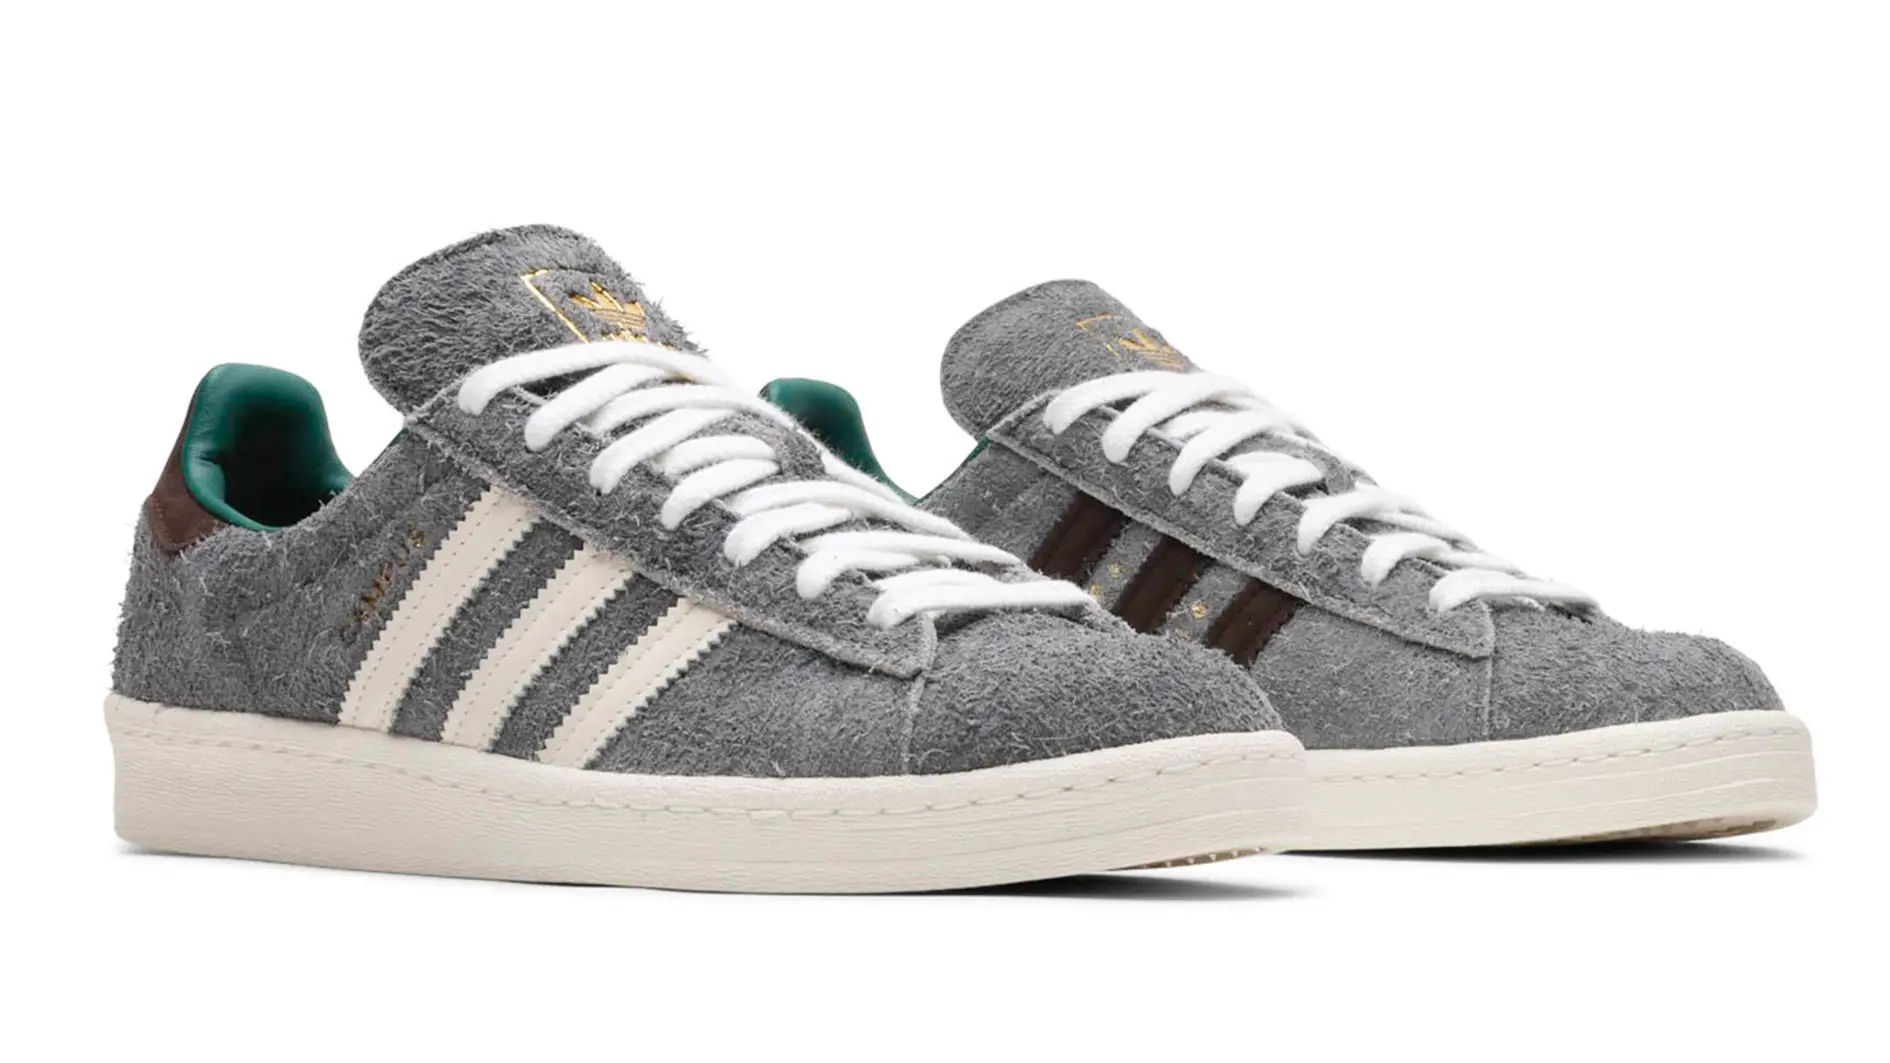 Attention Please: The Bodega x BEAMS x adidas Design Masterclass Is In ...